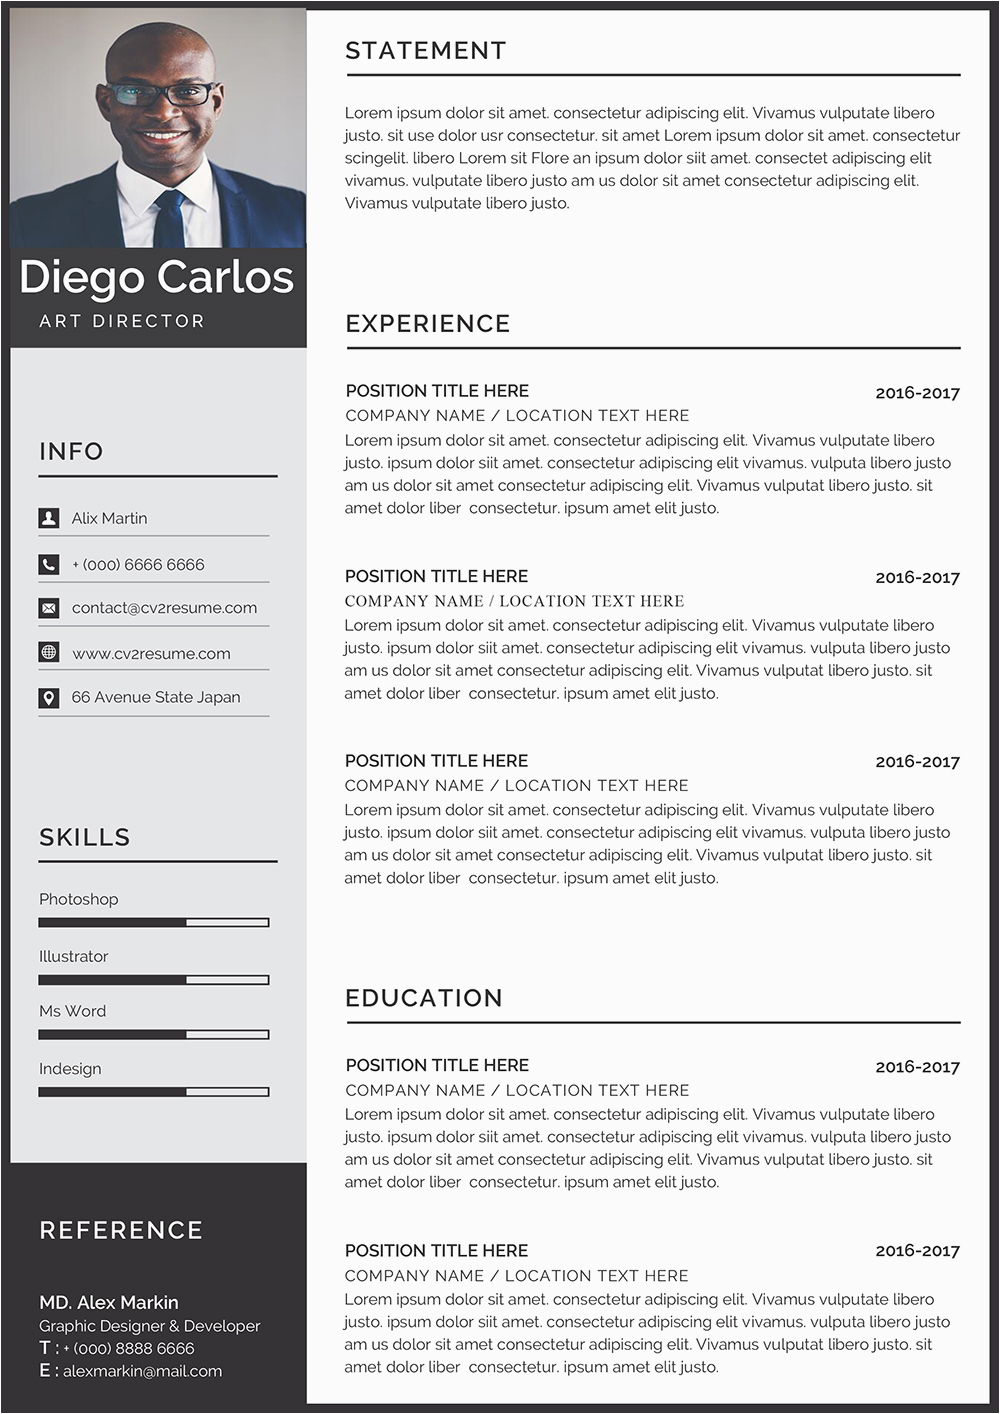 Best Professional Resume Templates Free Download Modern Minimalist Resume Template Download Professional